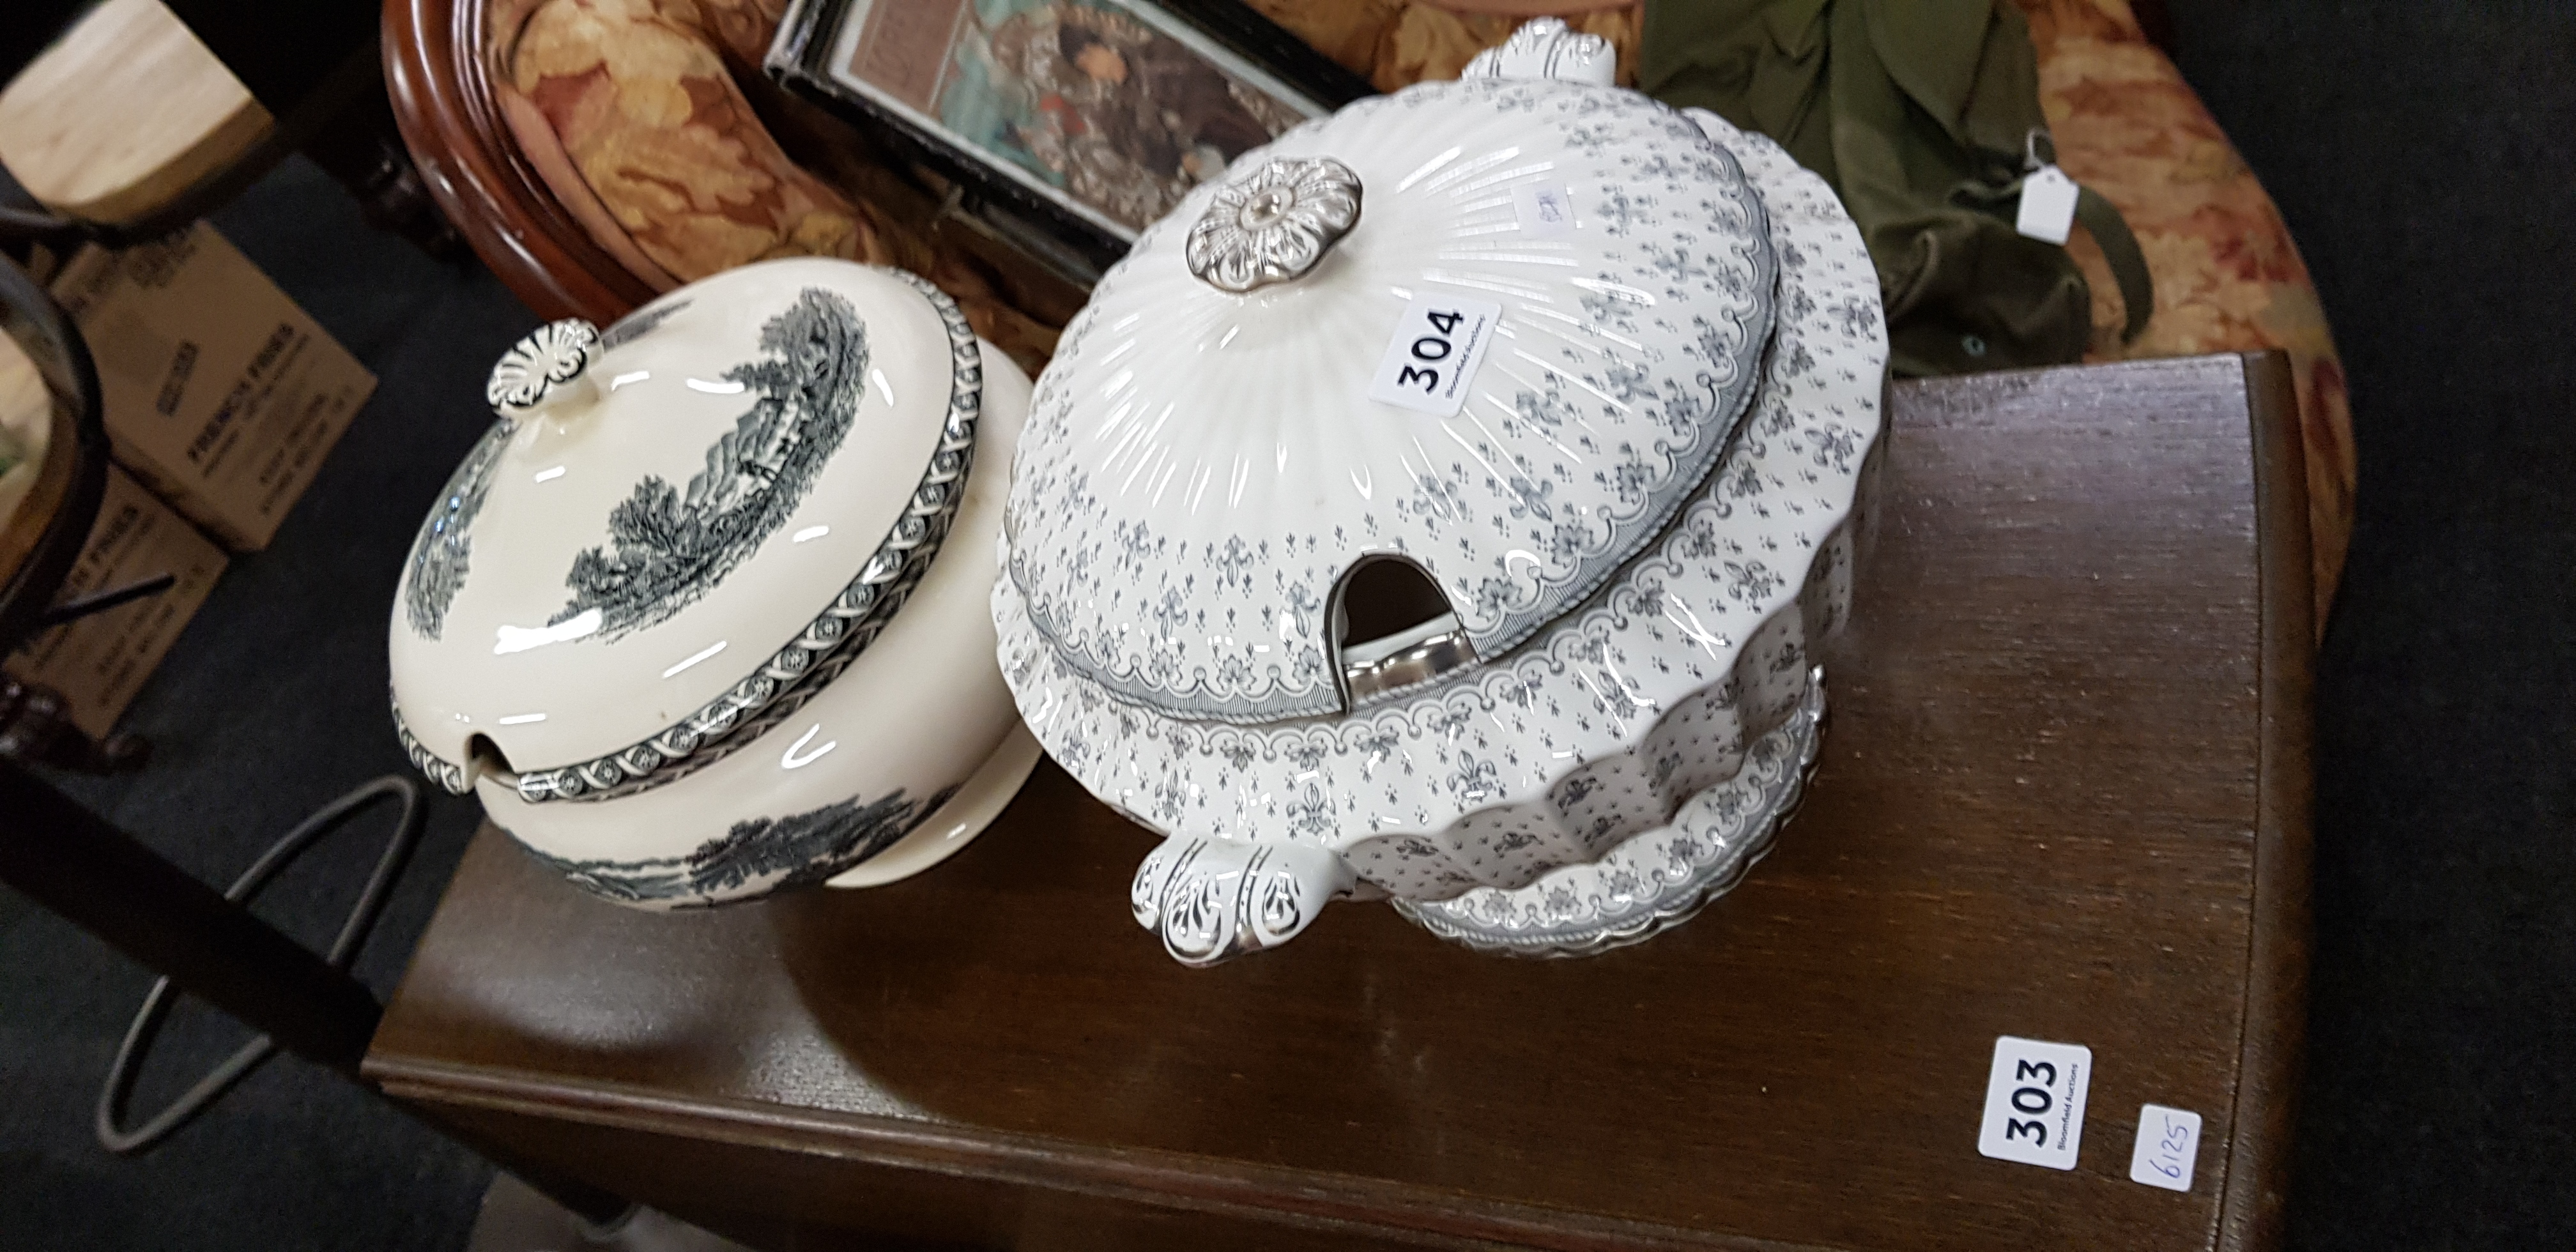 2 TUREENS (1 WEDGEWOOD AND 1 SPODE)